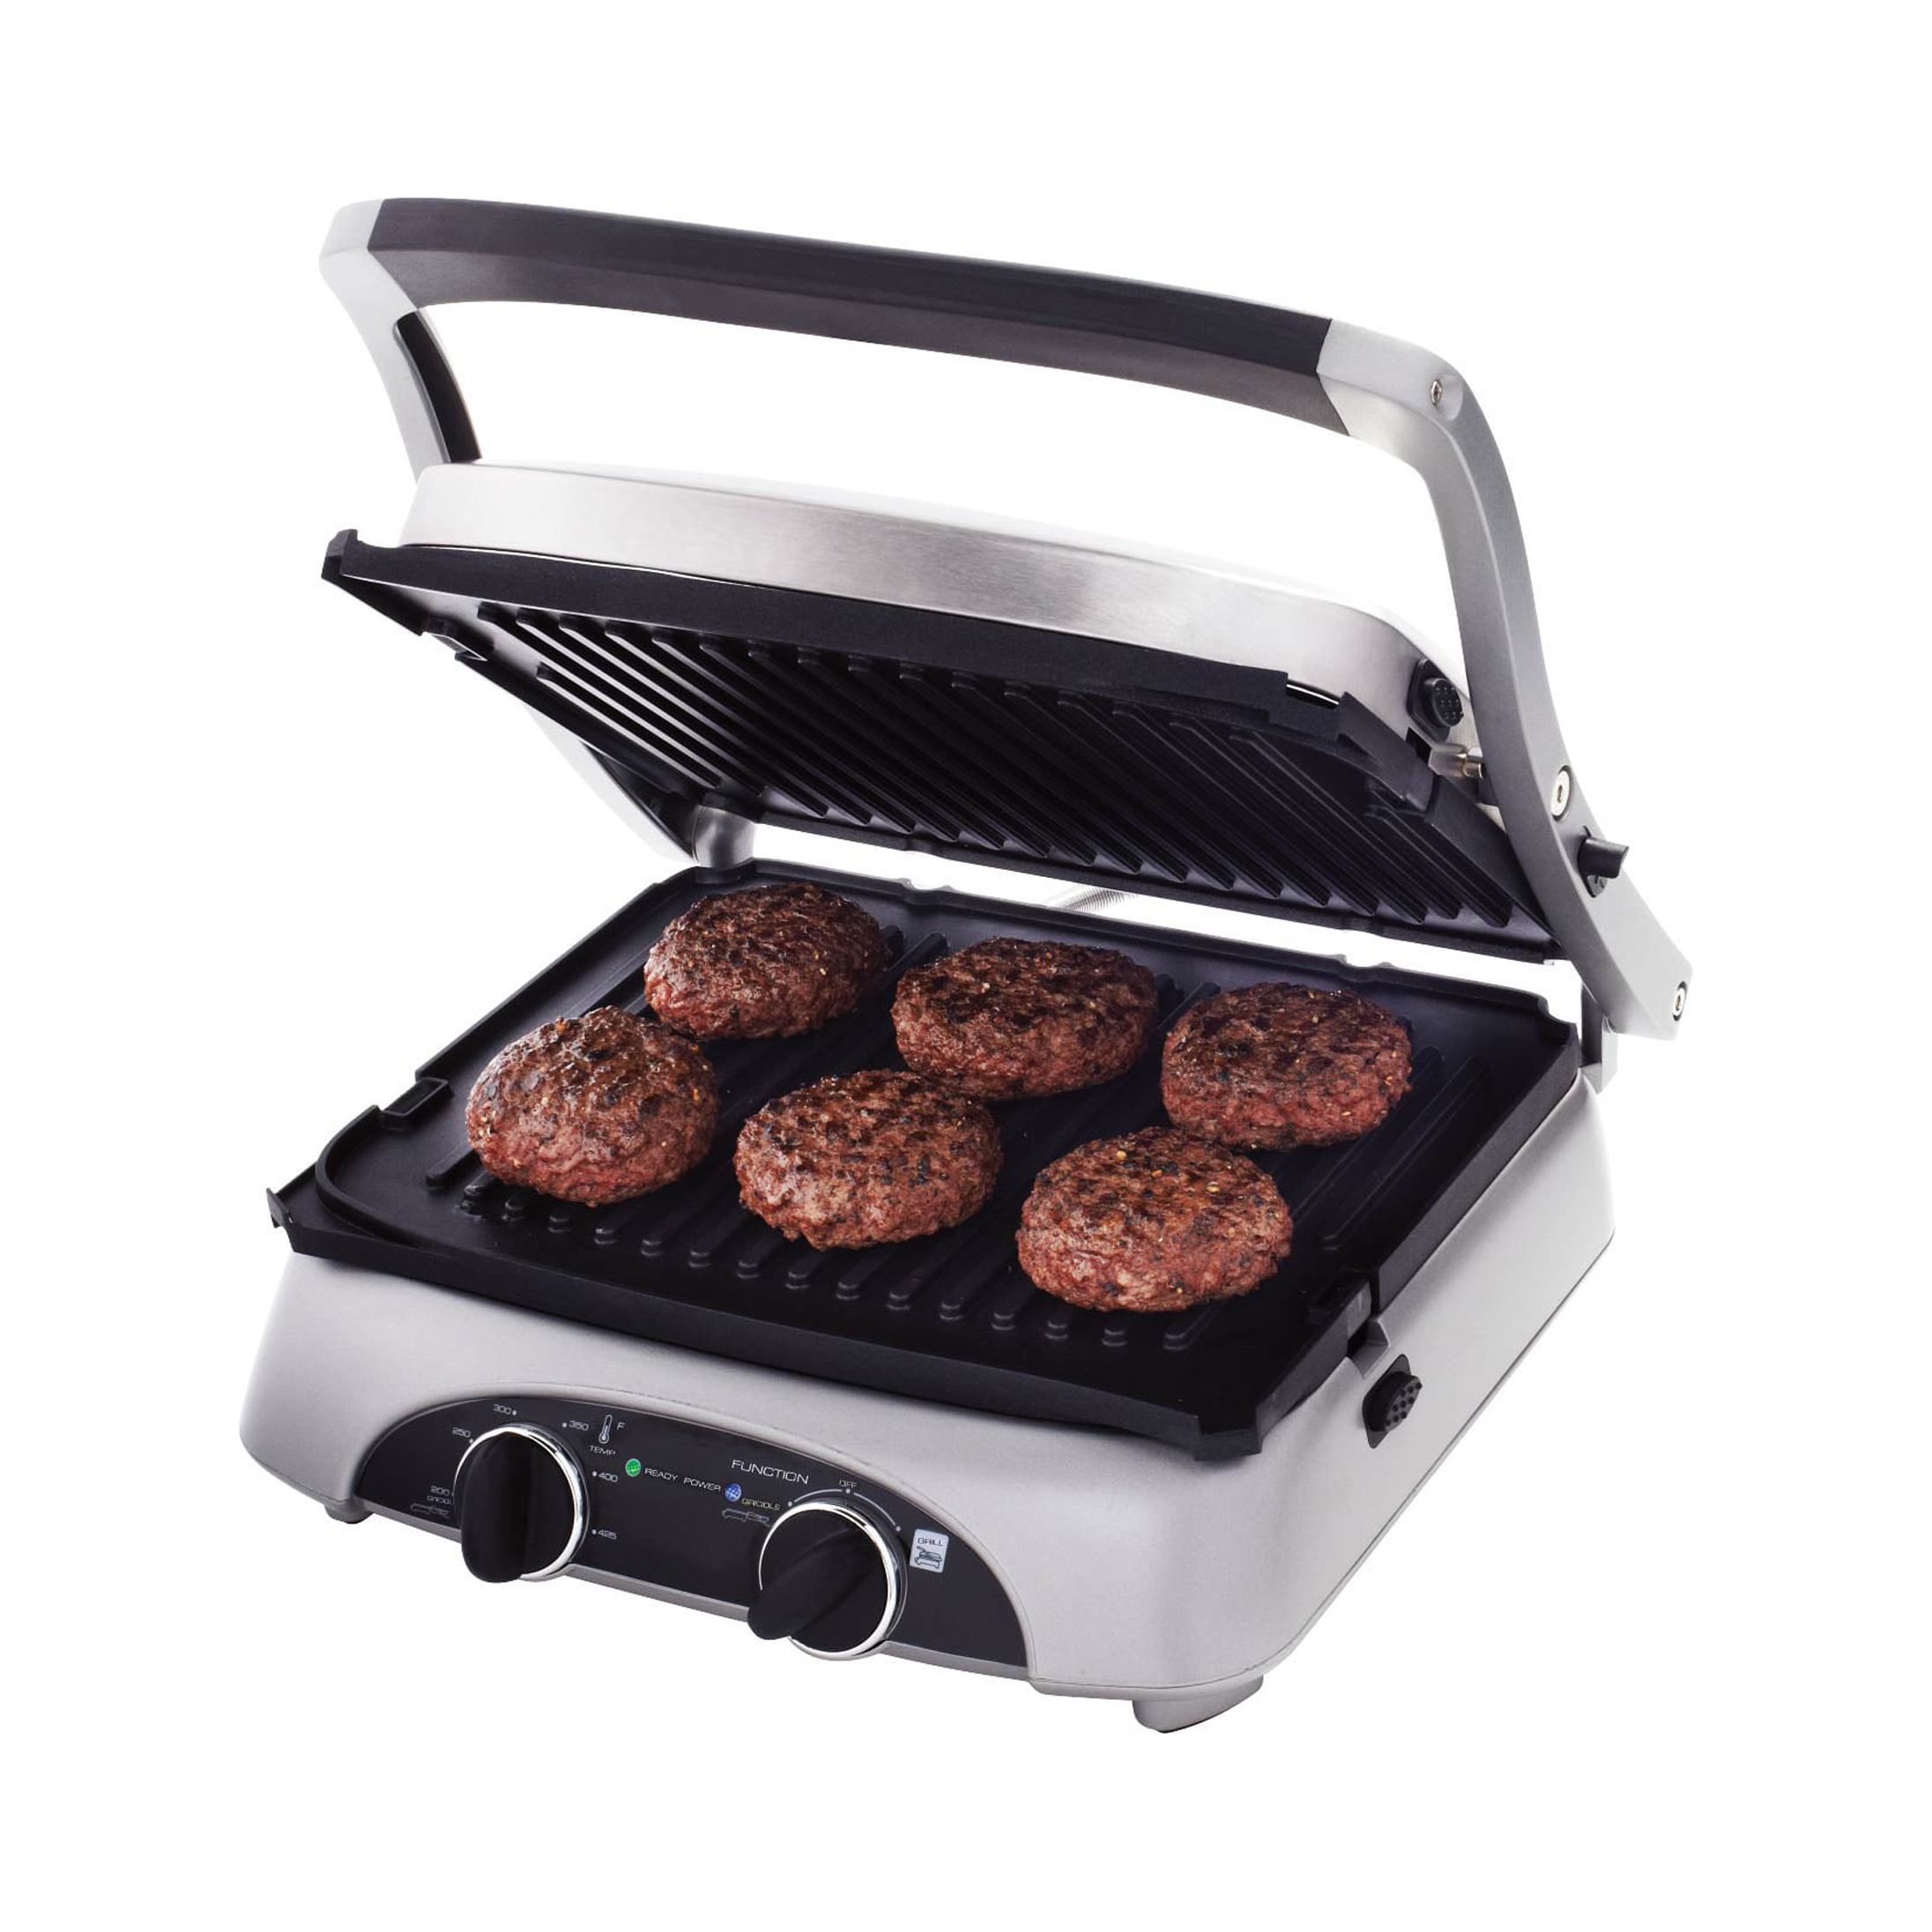 Farberware Royalty 4-In-1 Silver Grill - image 1 of 8